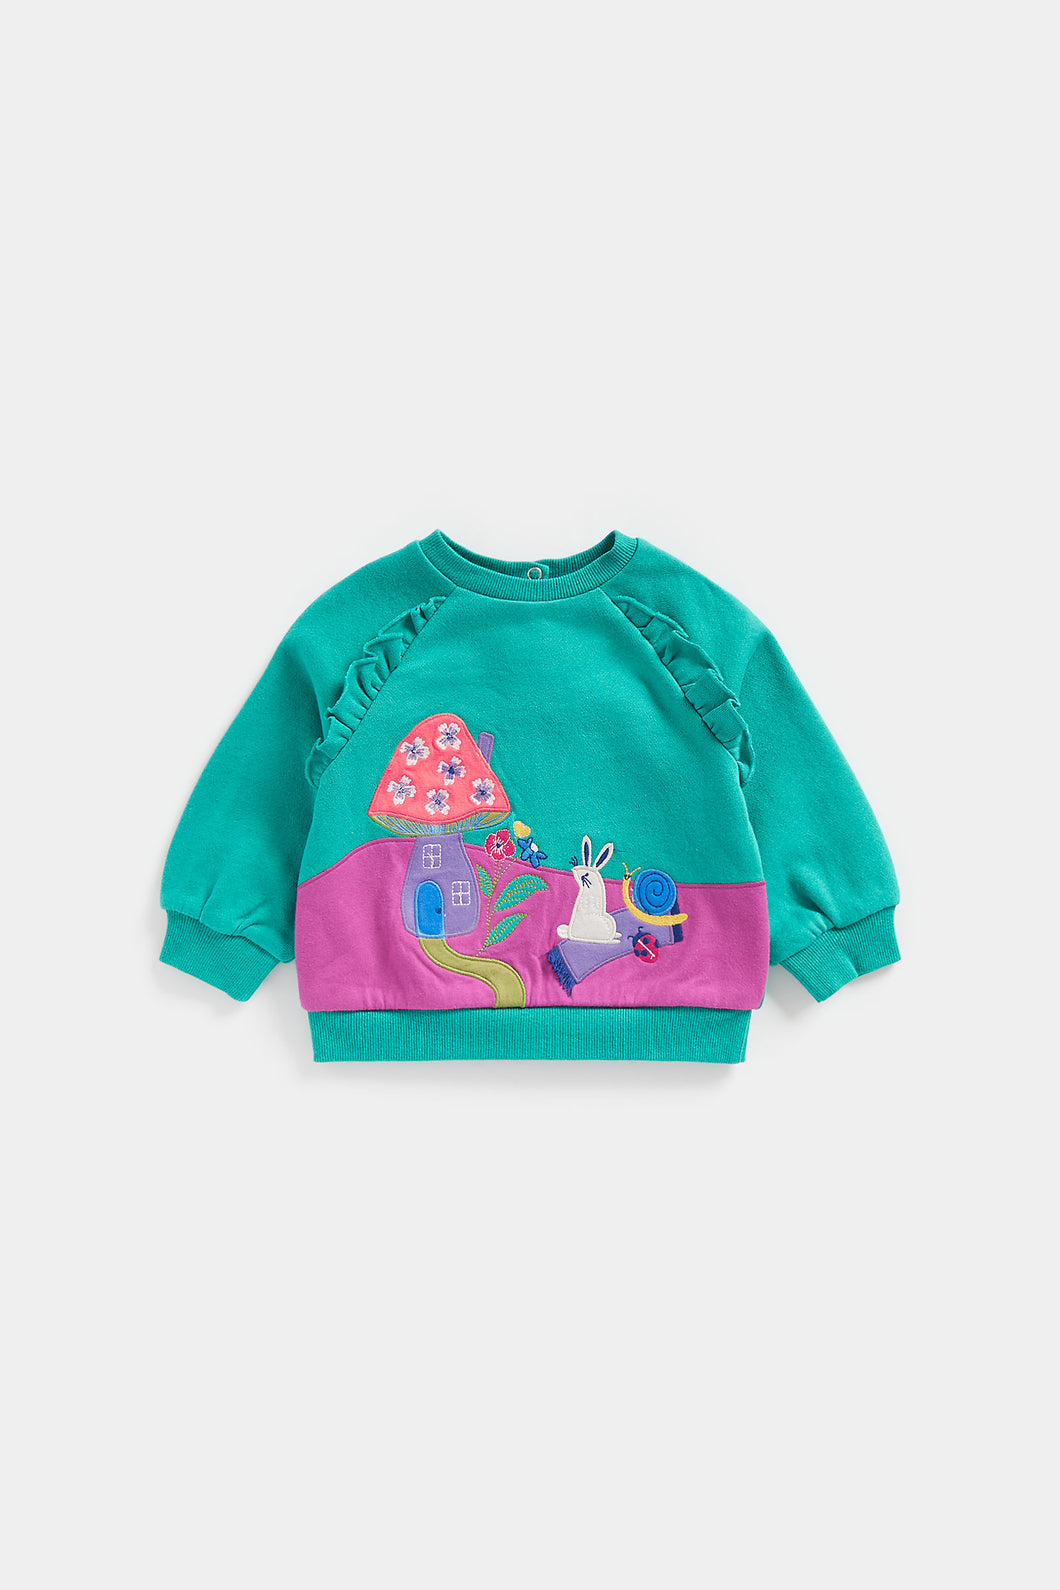 Mothercare Toadstool House Sweat Top